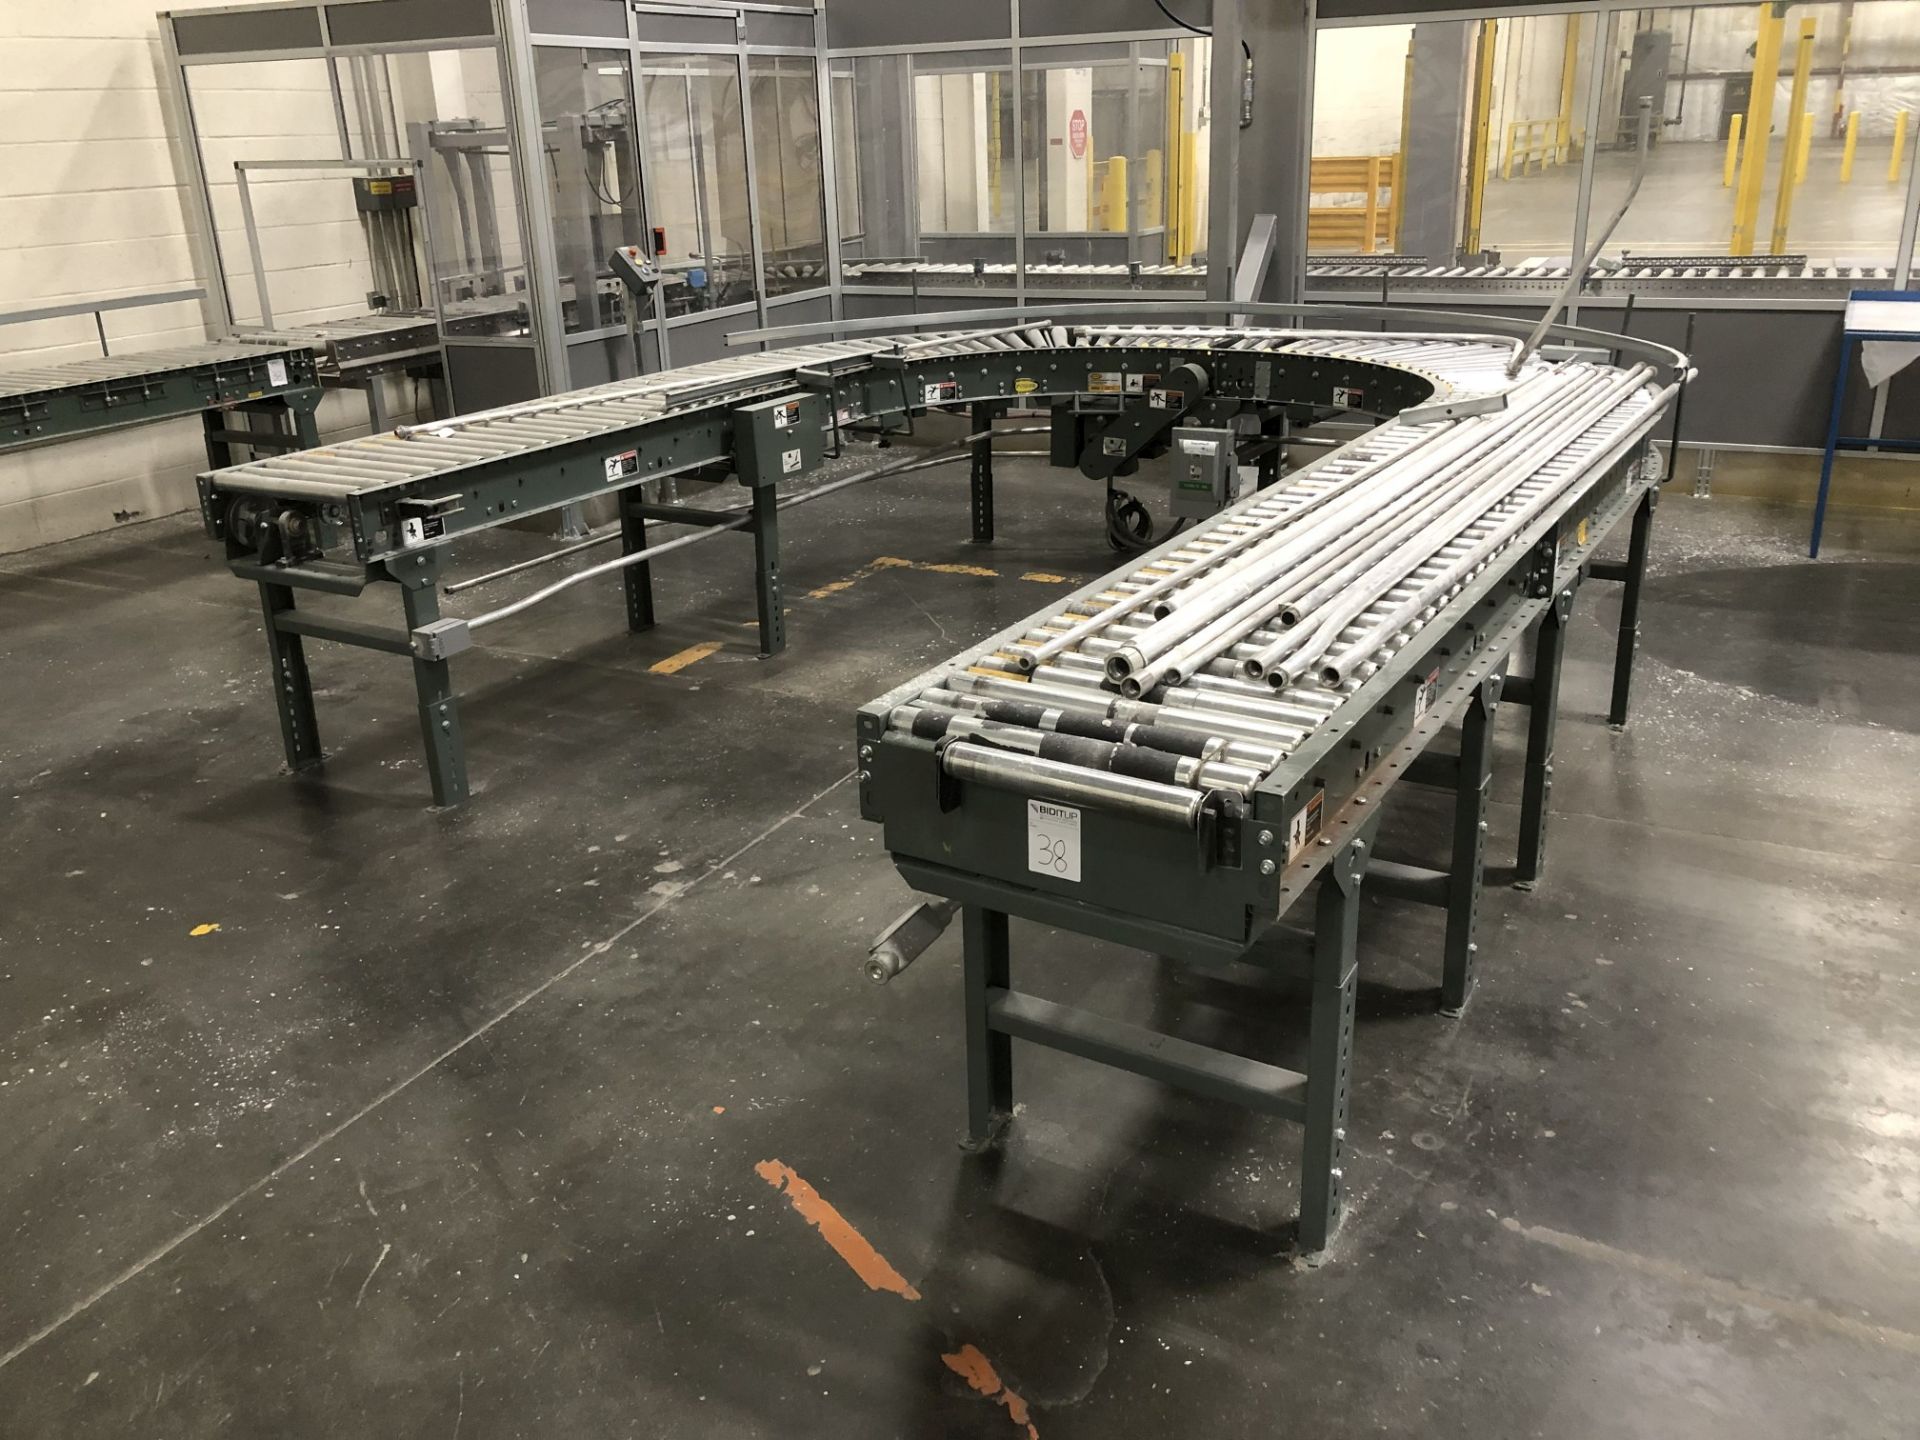 All Hytrol Conveyor Throughout Entire Site, Mostly 20" Wide Powered Roller Conveyor [Please - Image 31 of 80